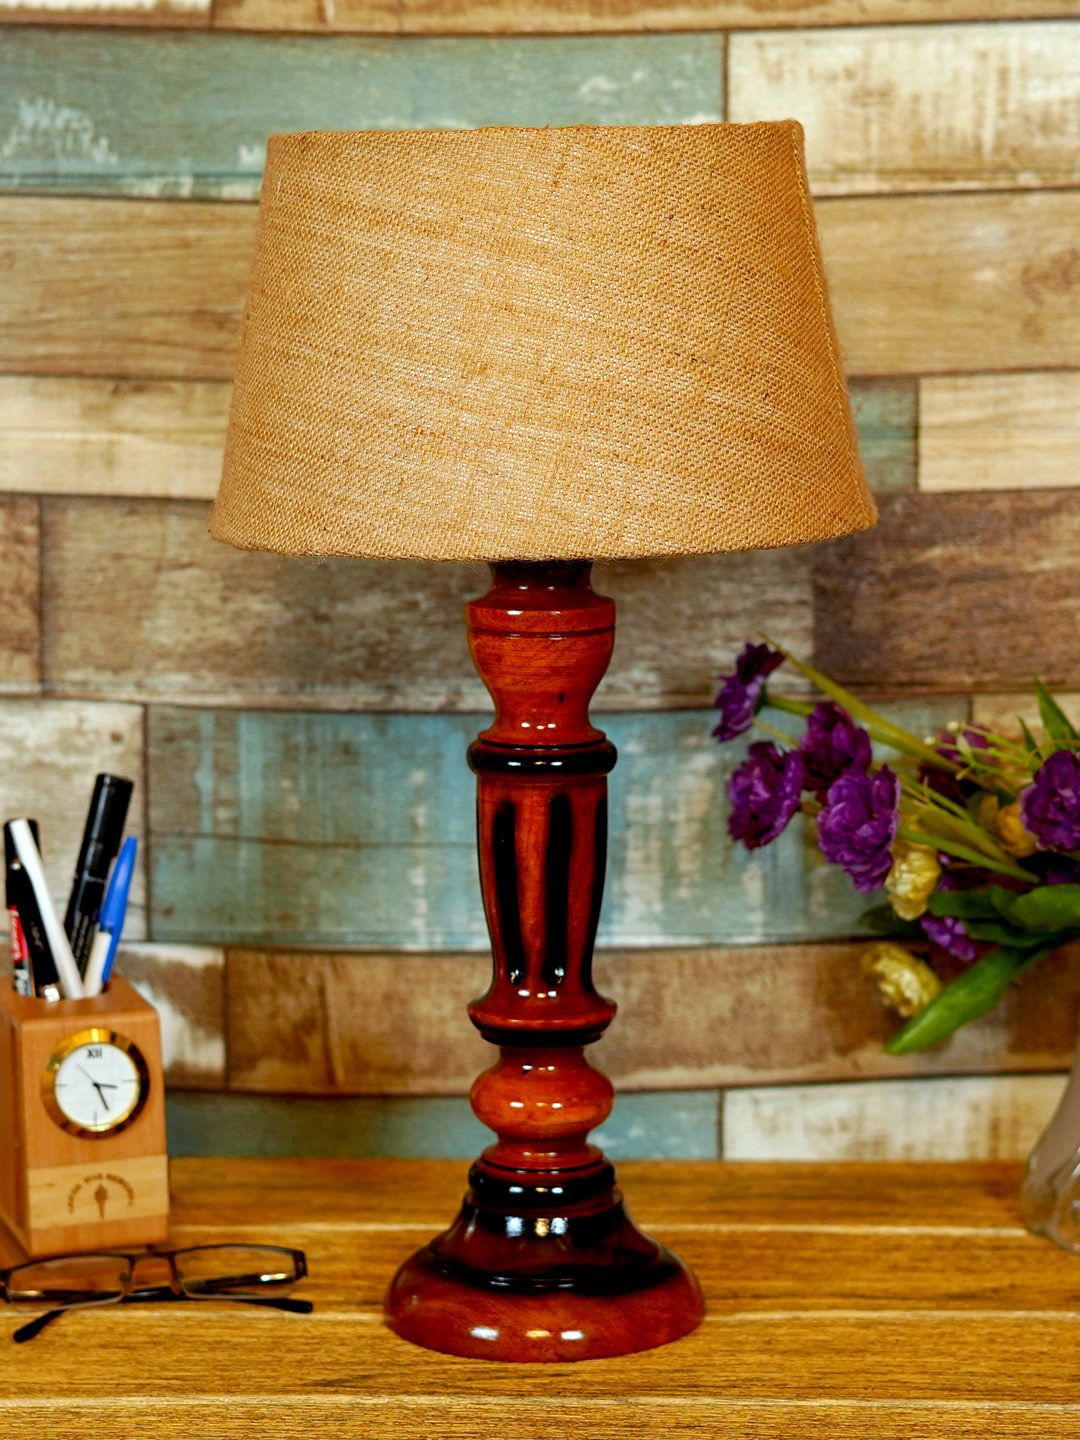 foziq Brown & Beige Textured Wooden Table Lamps Price in India